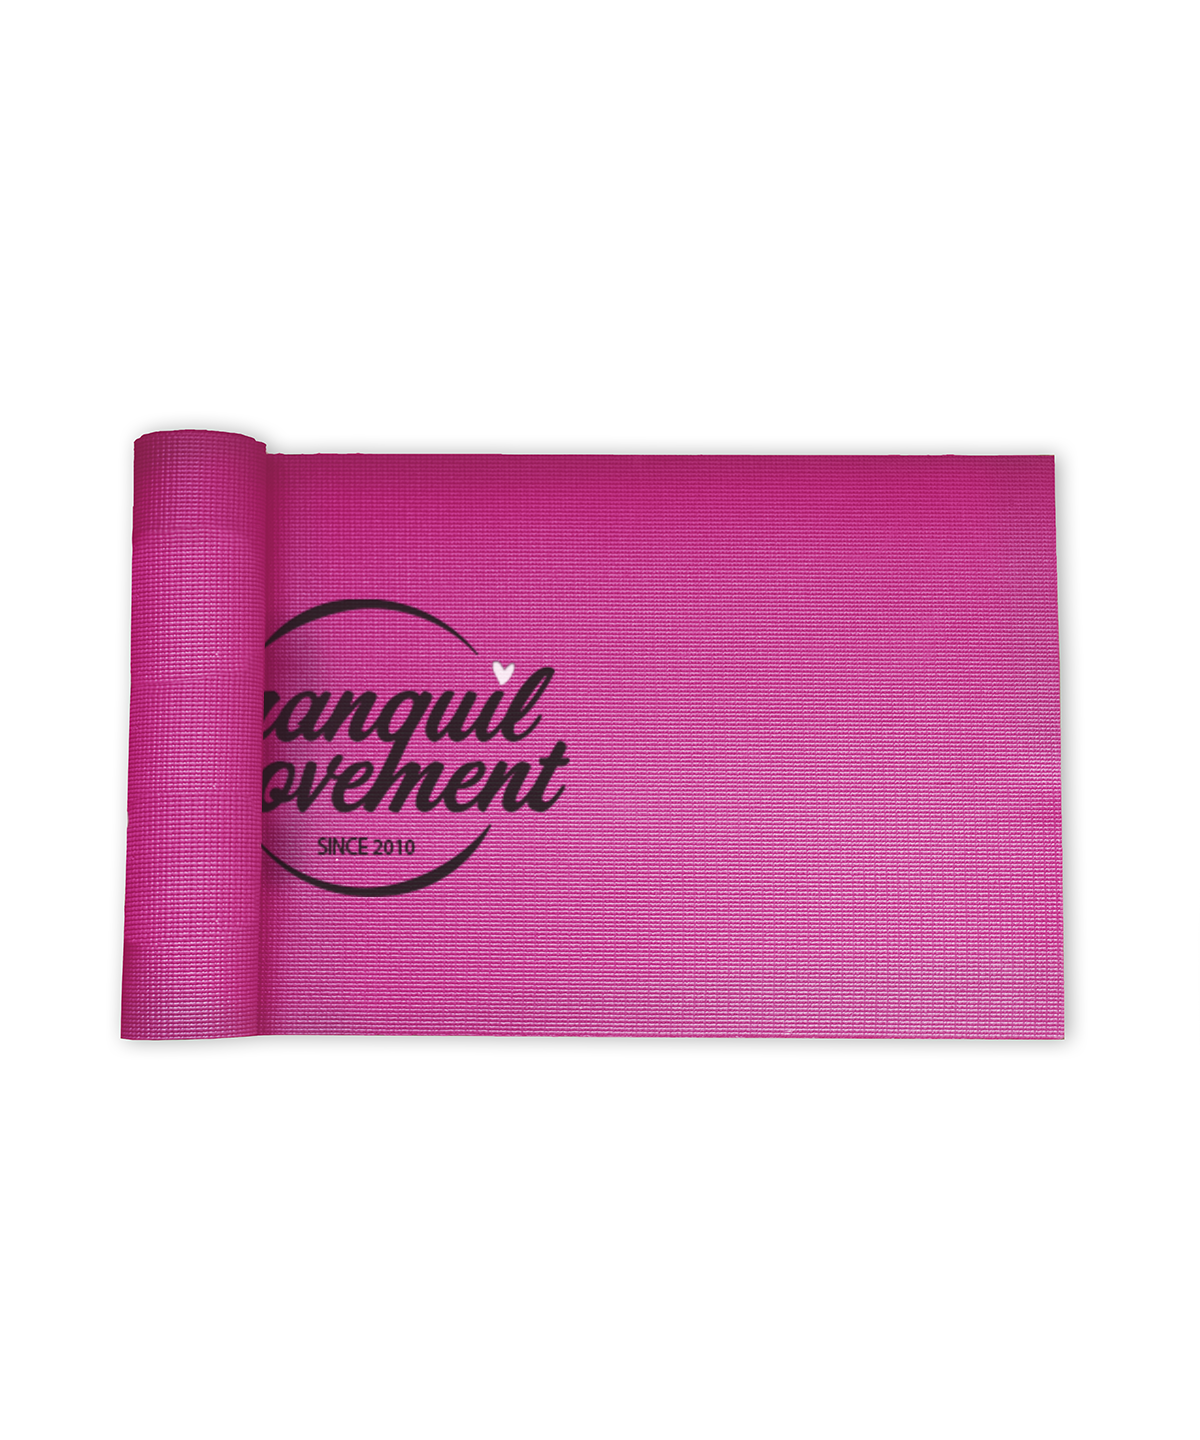 Branded Yoga and fitness mat